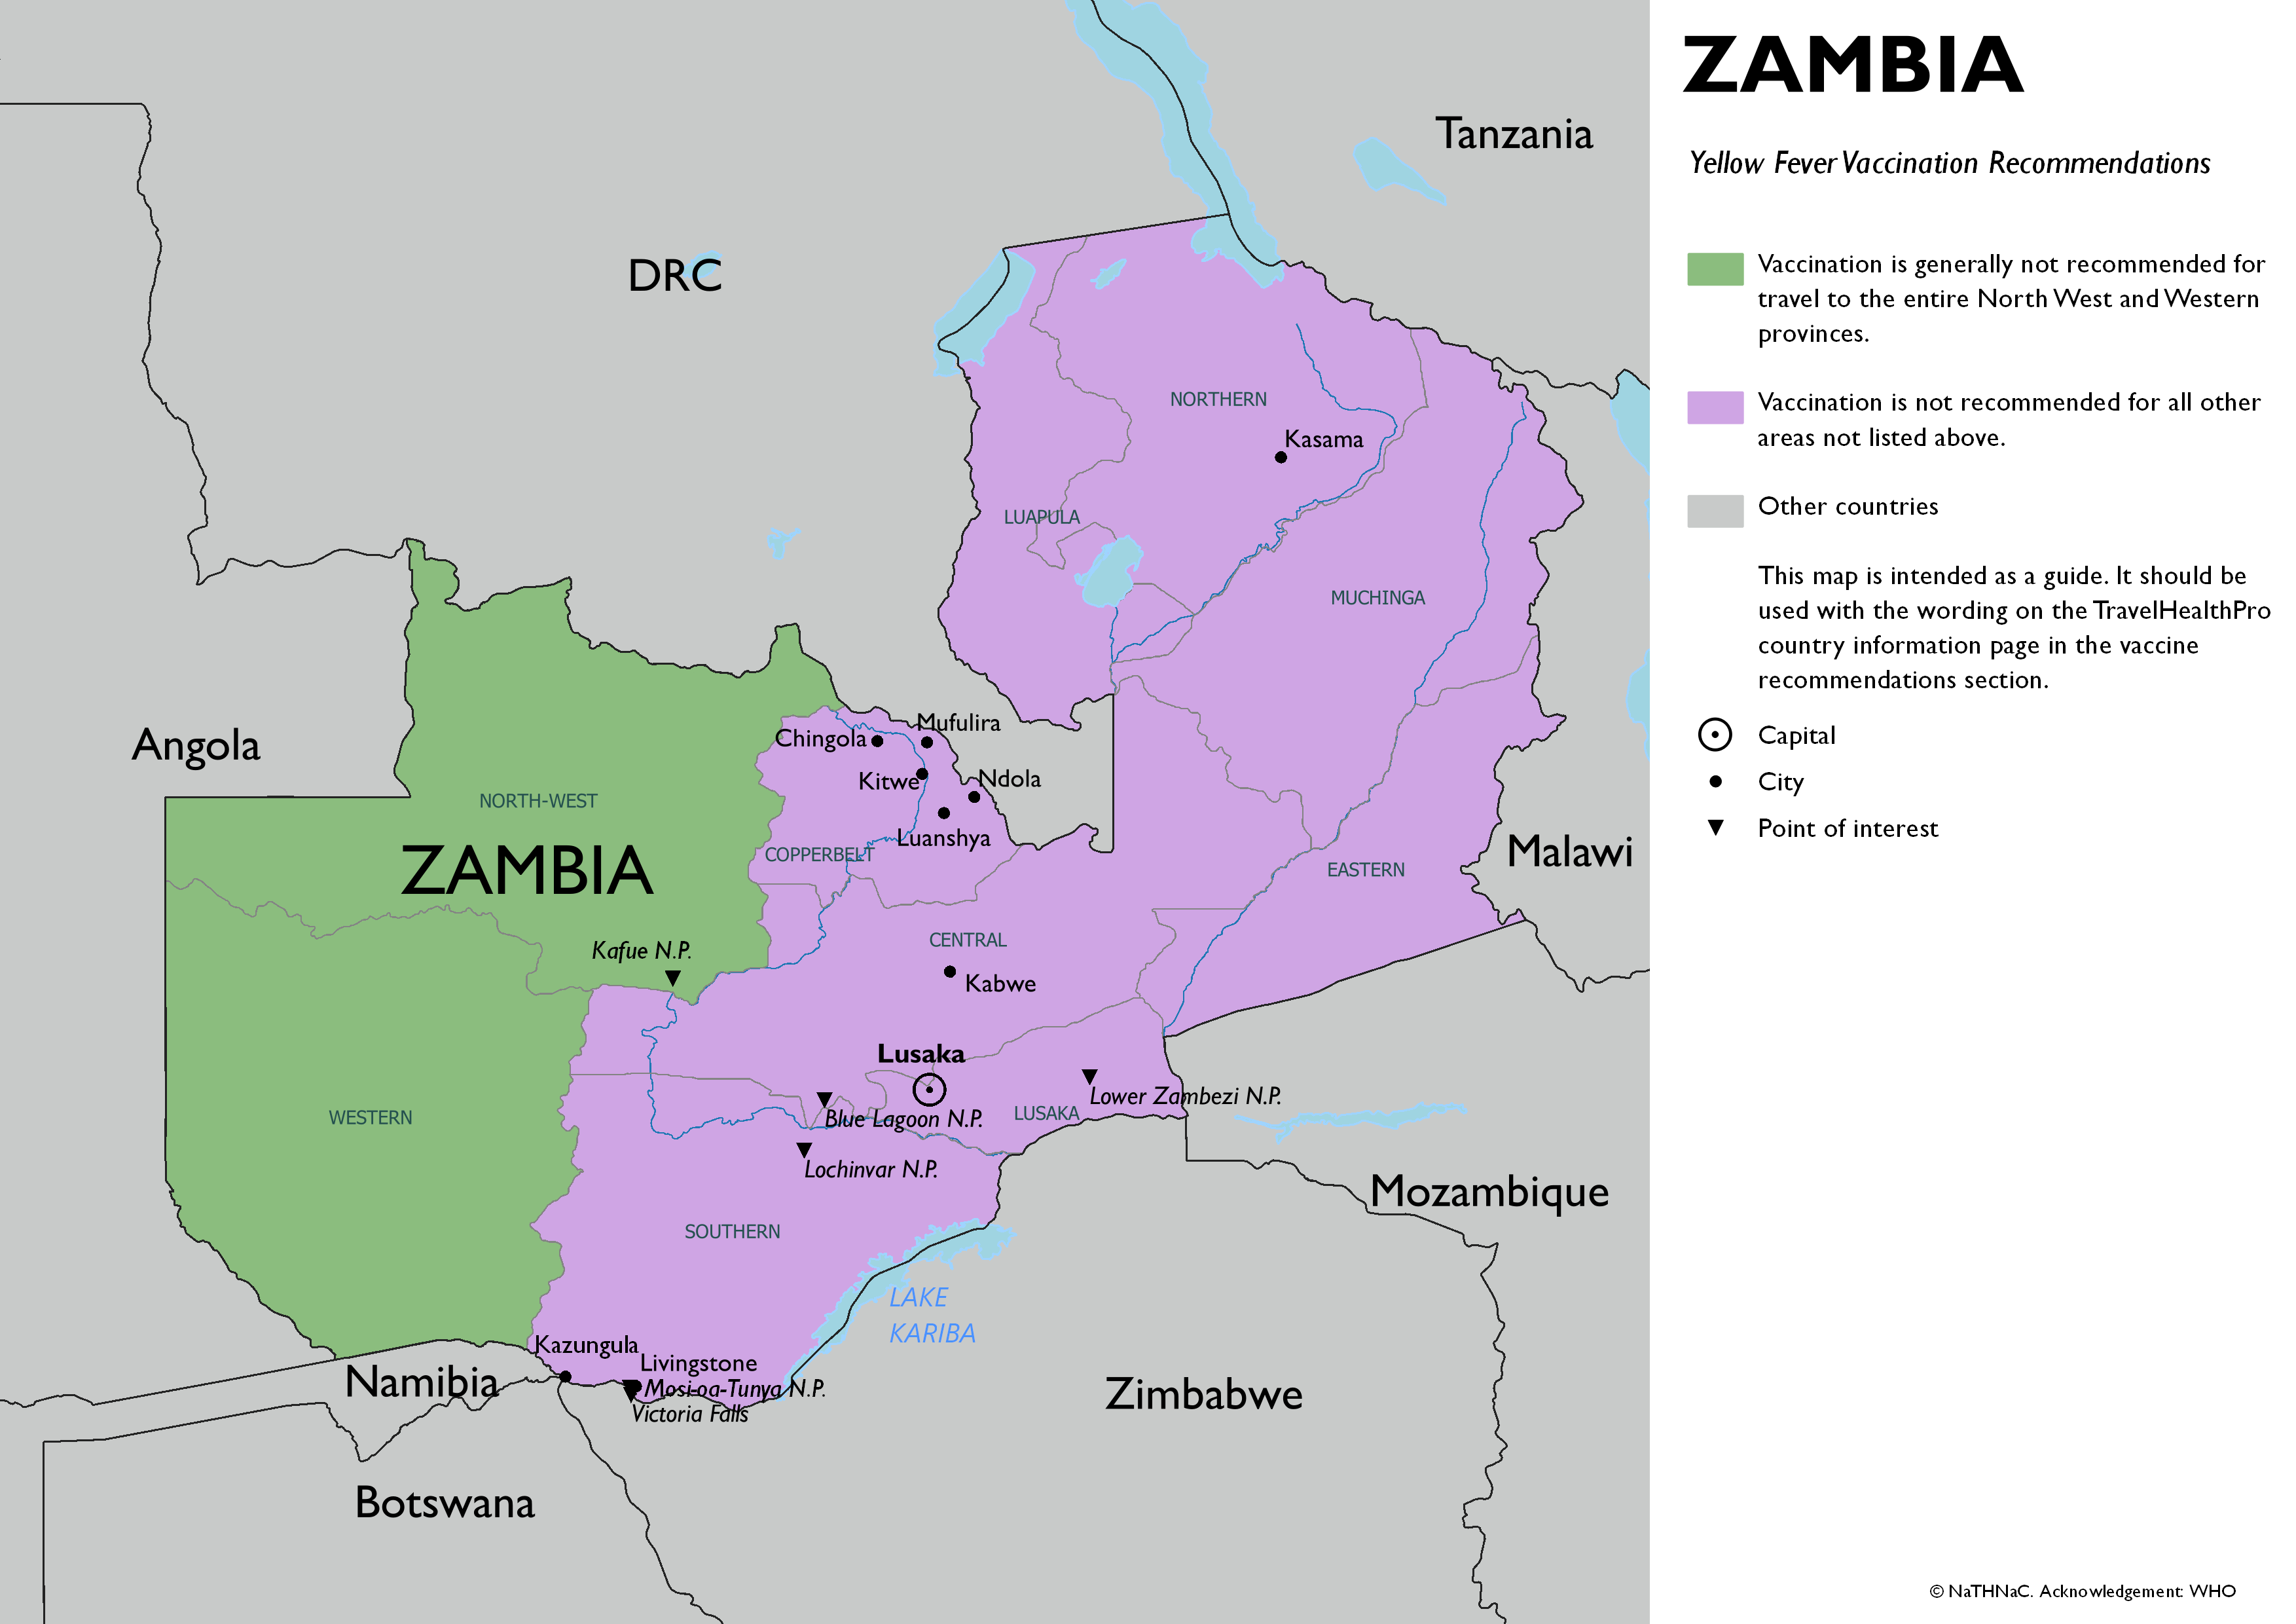 Yellow fever vaccine recommendation map for Zambia